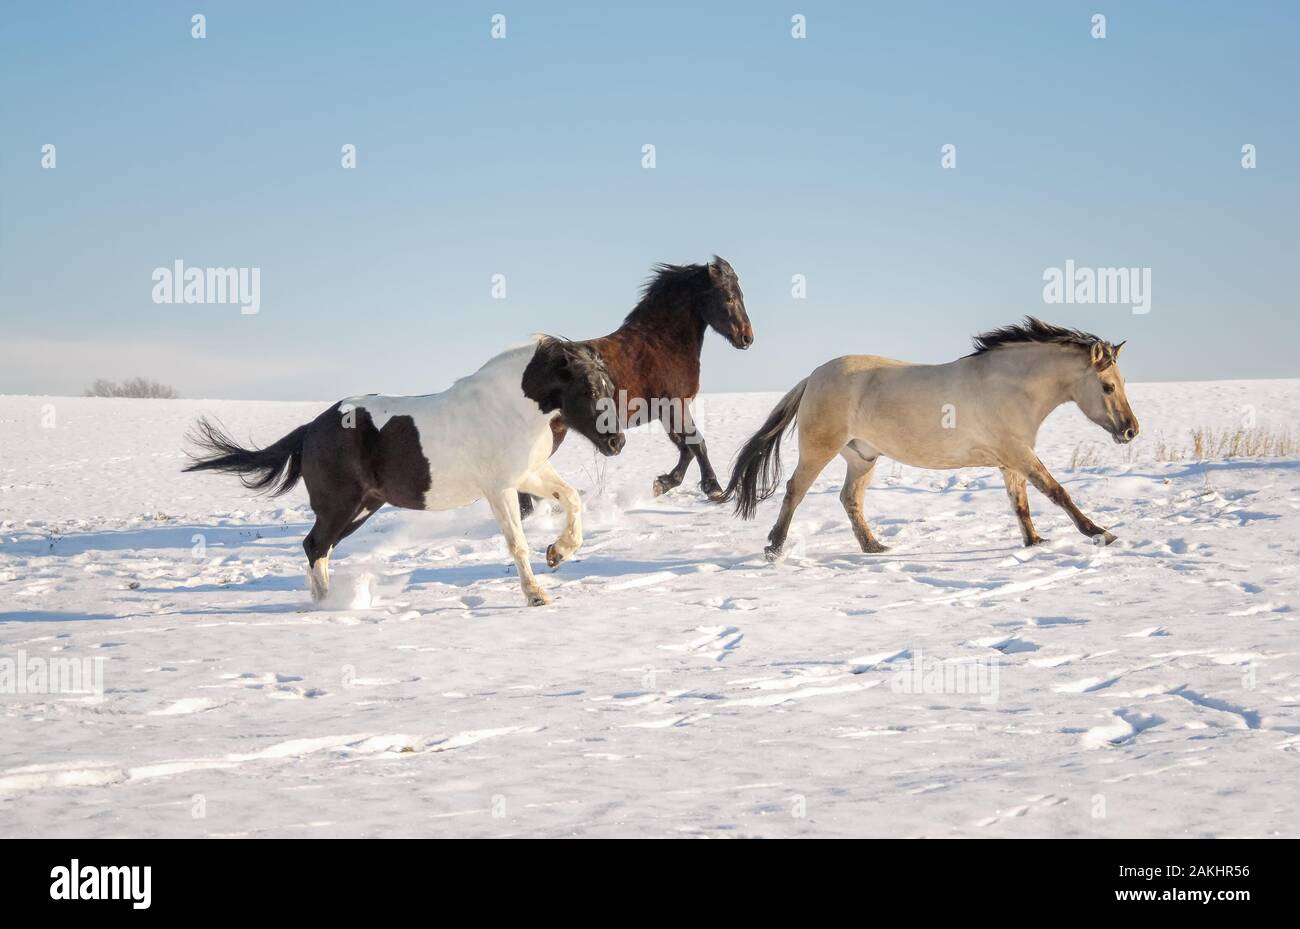 Group of three horses, different coat colors, running together at a gallop across a snow covered meadow on a cold sunny winter day Stock Photo